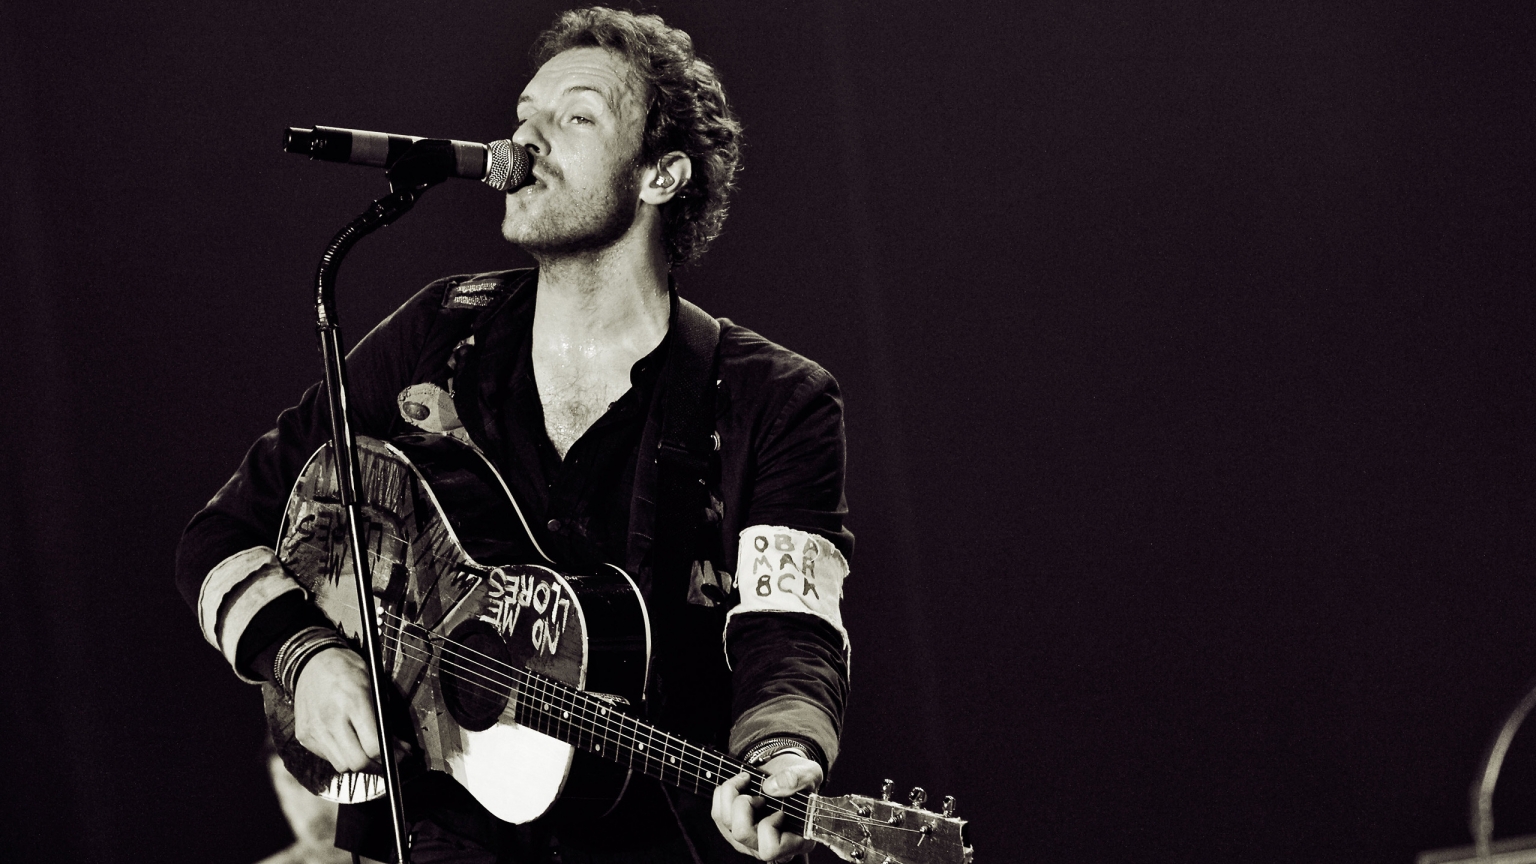 Chris Martin Coldplay for 1536 x 864 HDTV resolution